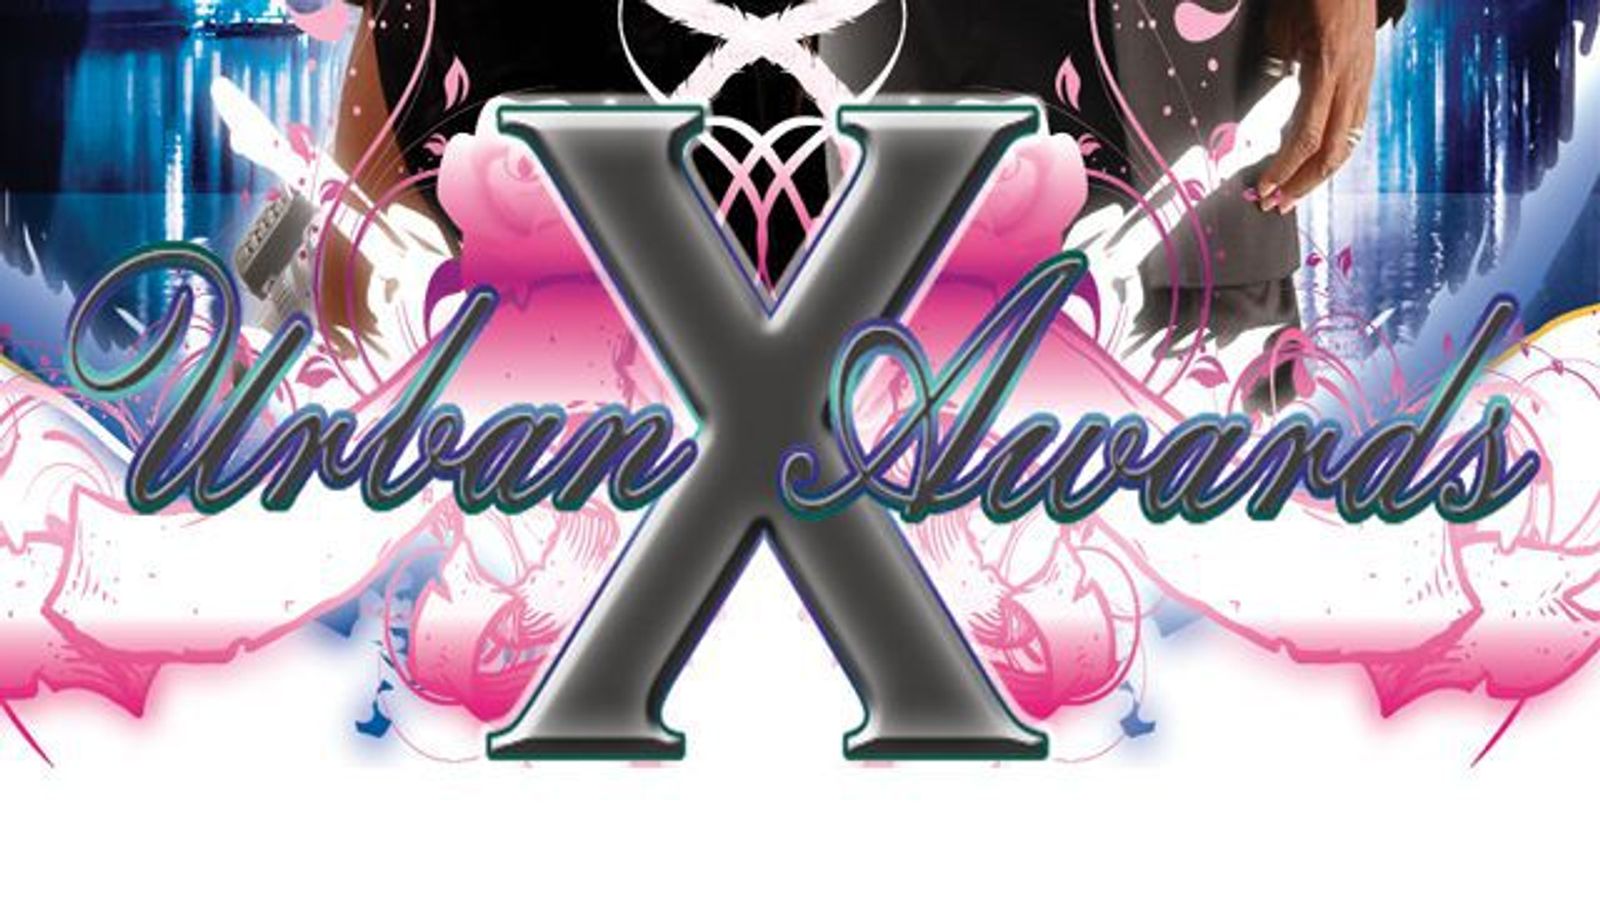 Urban X Awards Releases Full Slate of 2012 Nominees